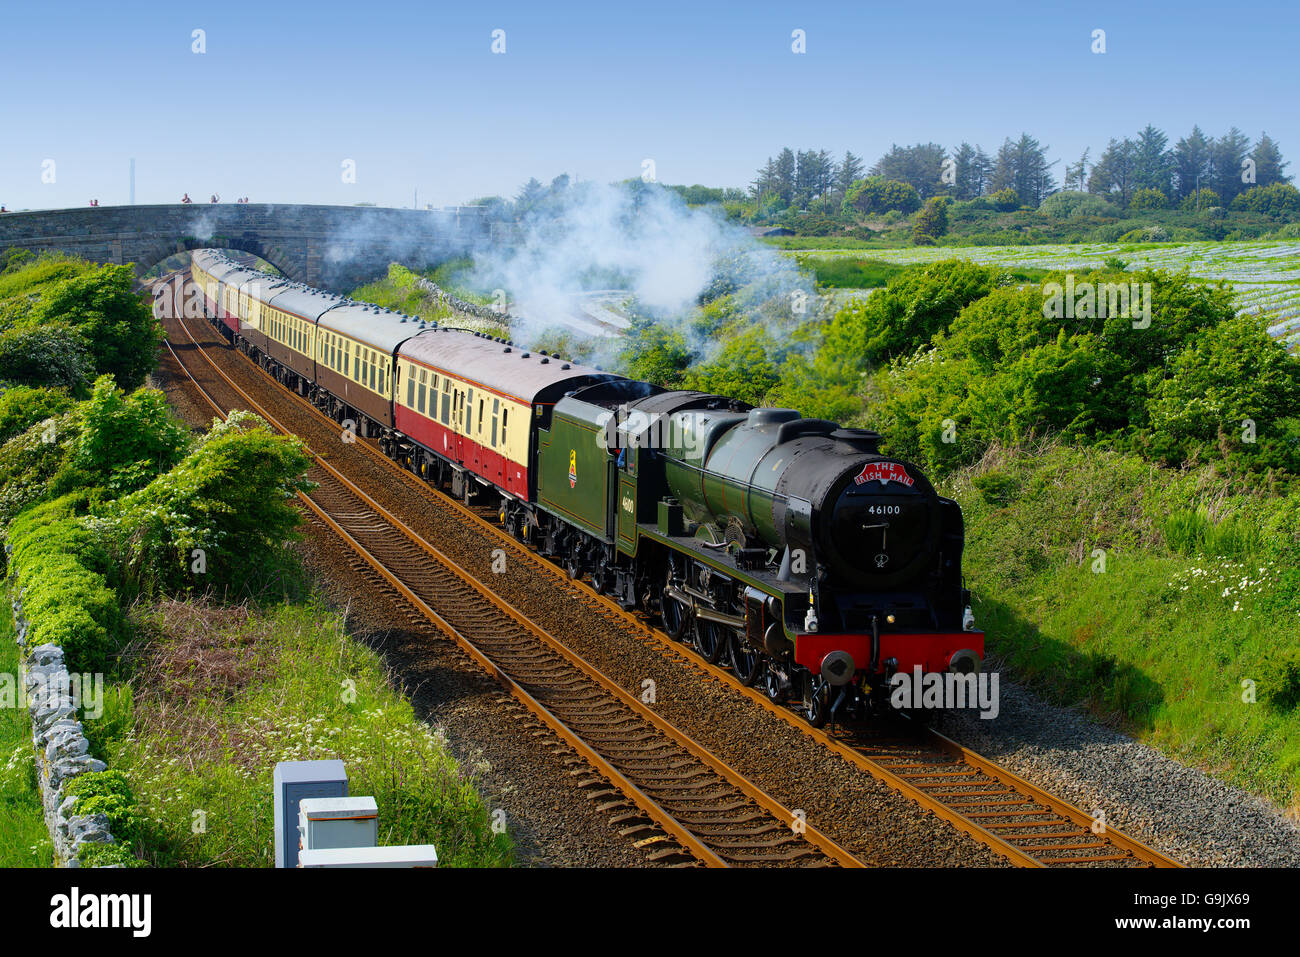 46100 Royal Scot Locomotive at Valley, Anglesey, , Banque D'Images